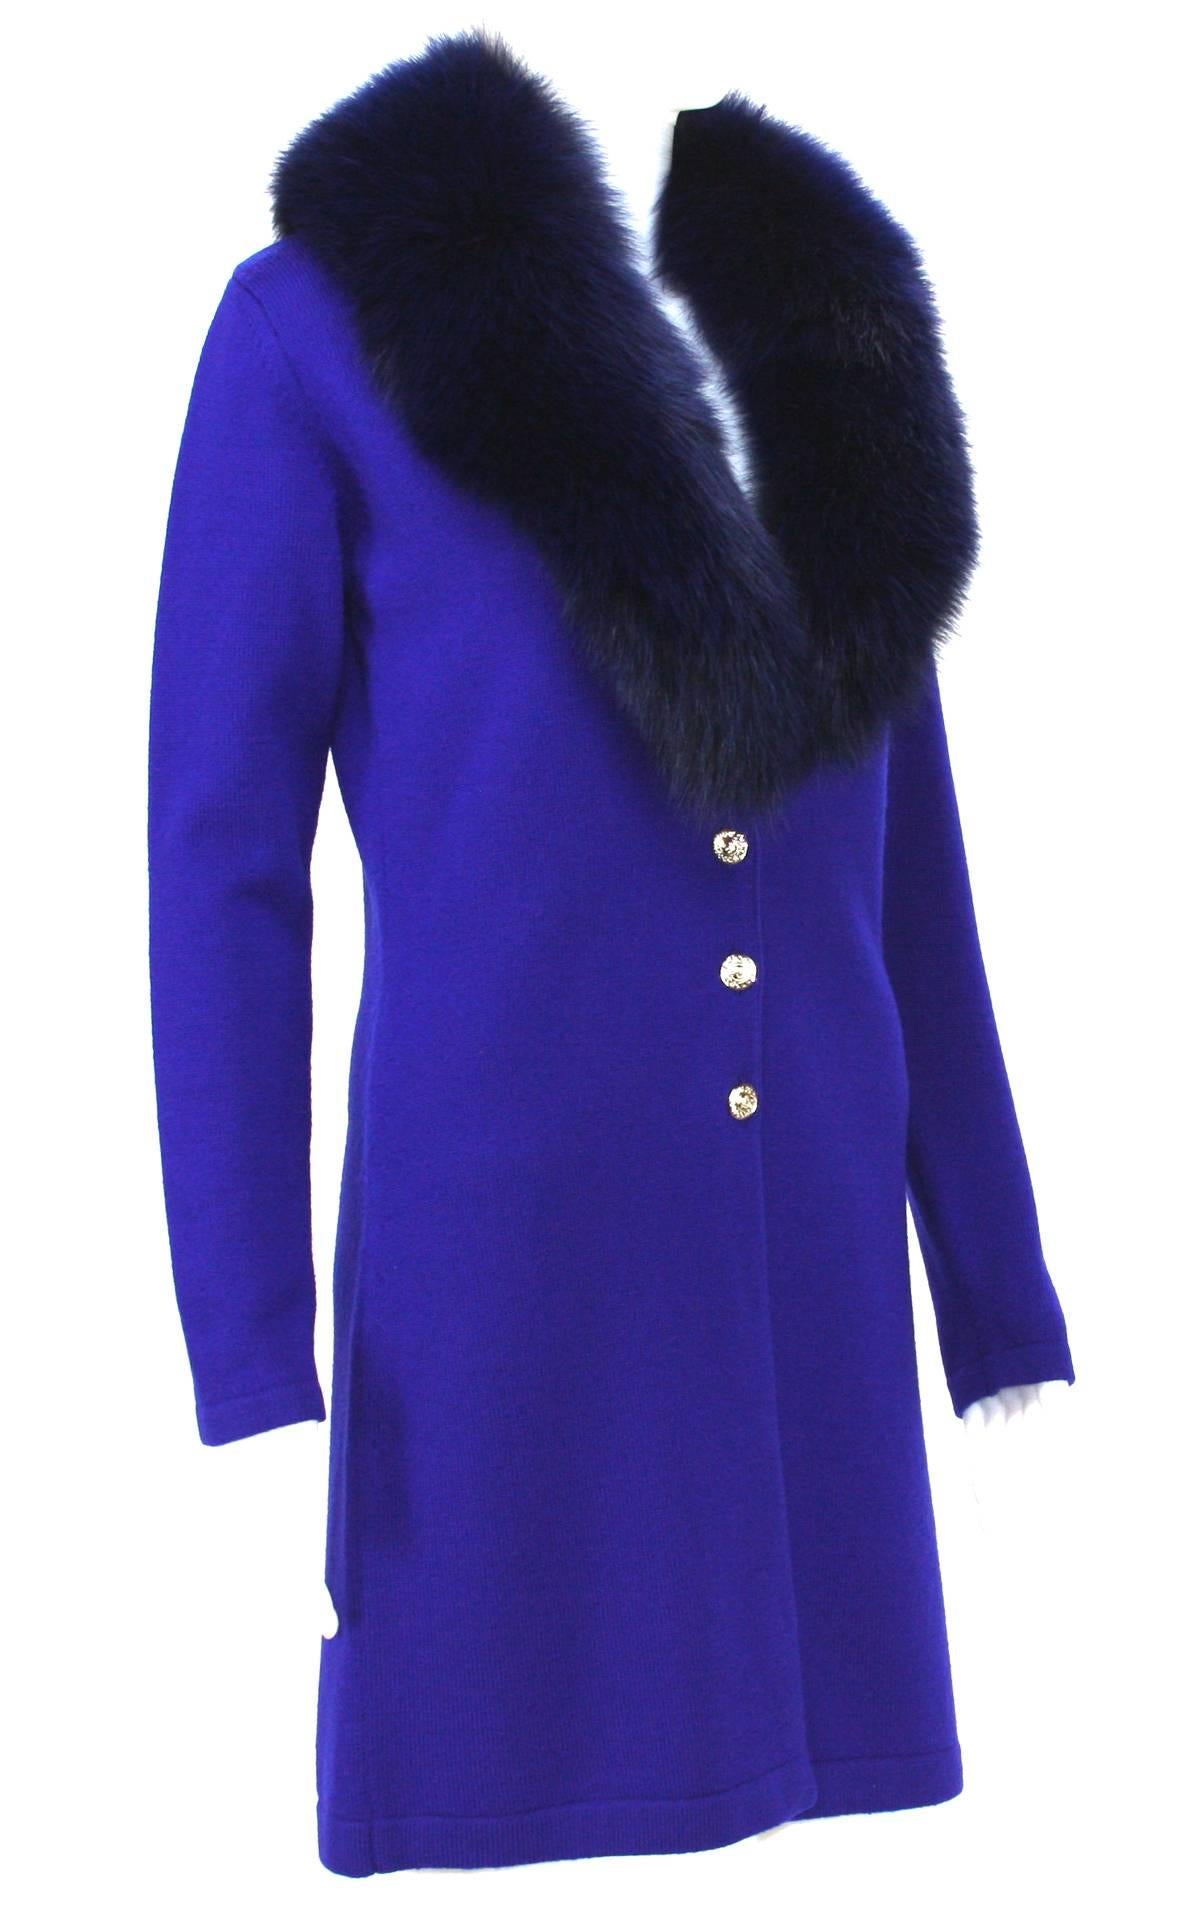 New Versace Wool Cardigan with Detachable Fox Collar Cardigan
Italian Sizes 38
Color - Purple Blue
100% Wool
Real Colored Fox Fur - Origin Finland
Collar Reverse - 100% Silk
Collar Detachable
Gold-tone Buttons Closure with Versace